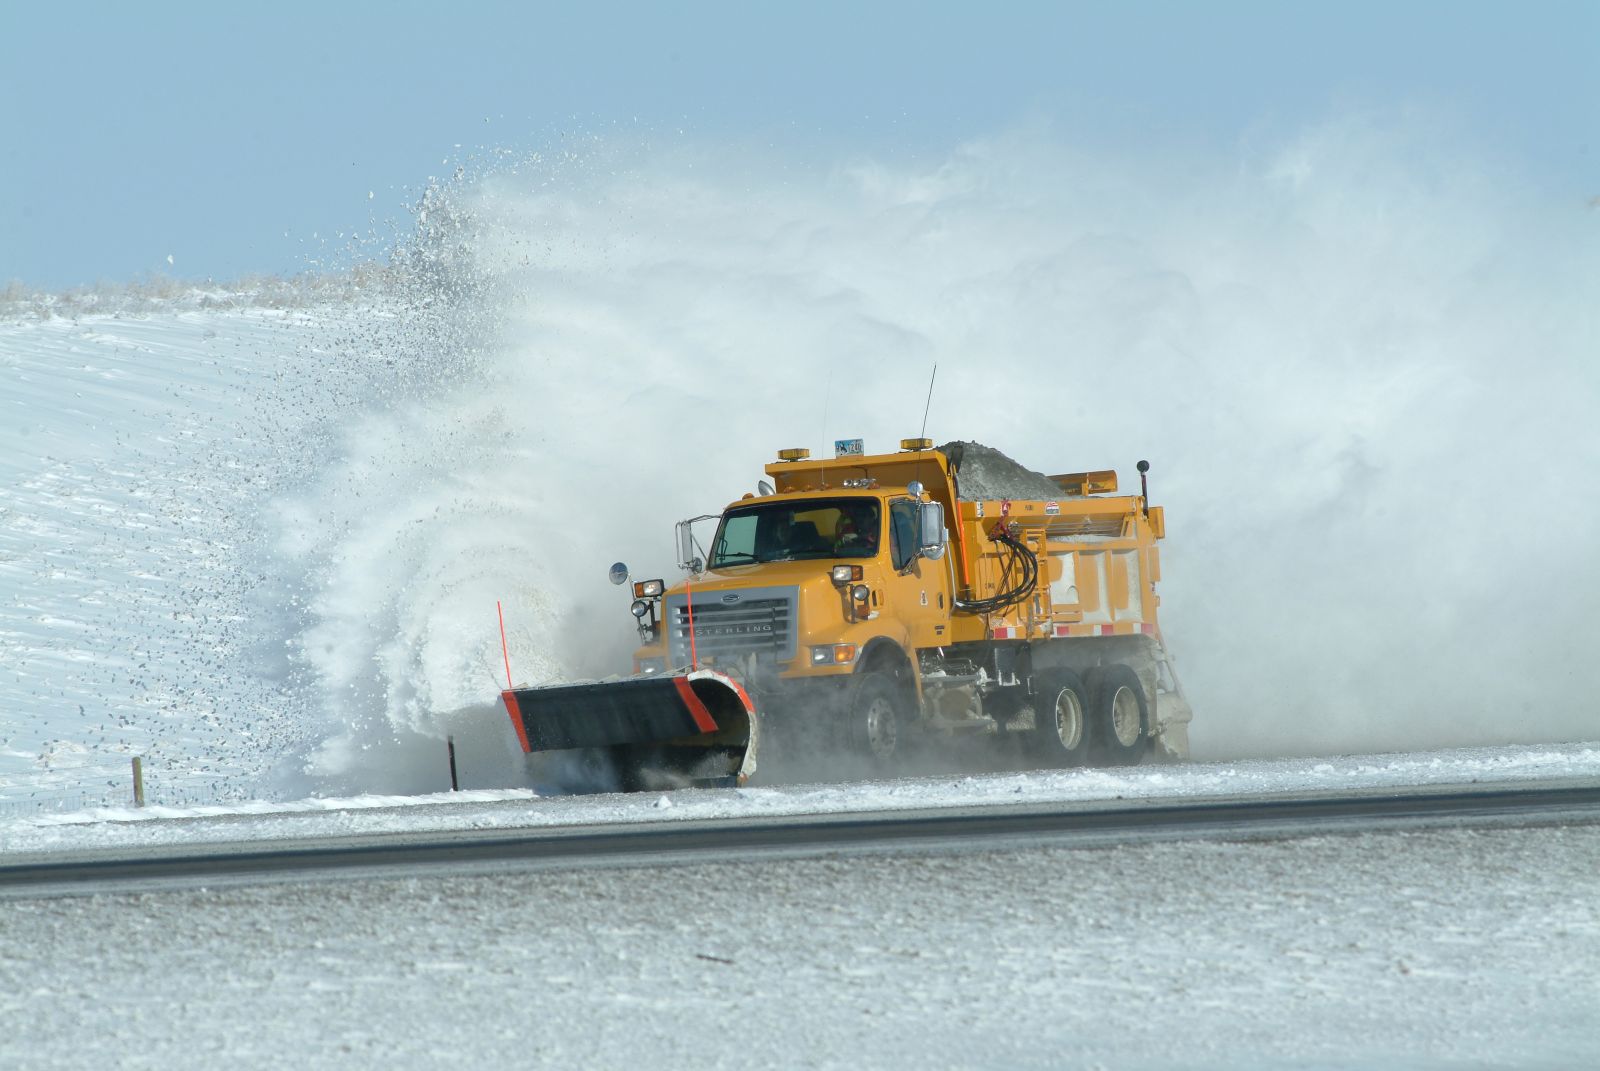 WYDOT clears snow on Interstate 80